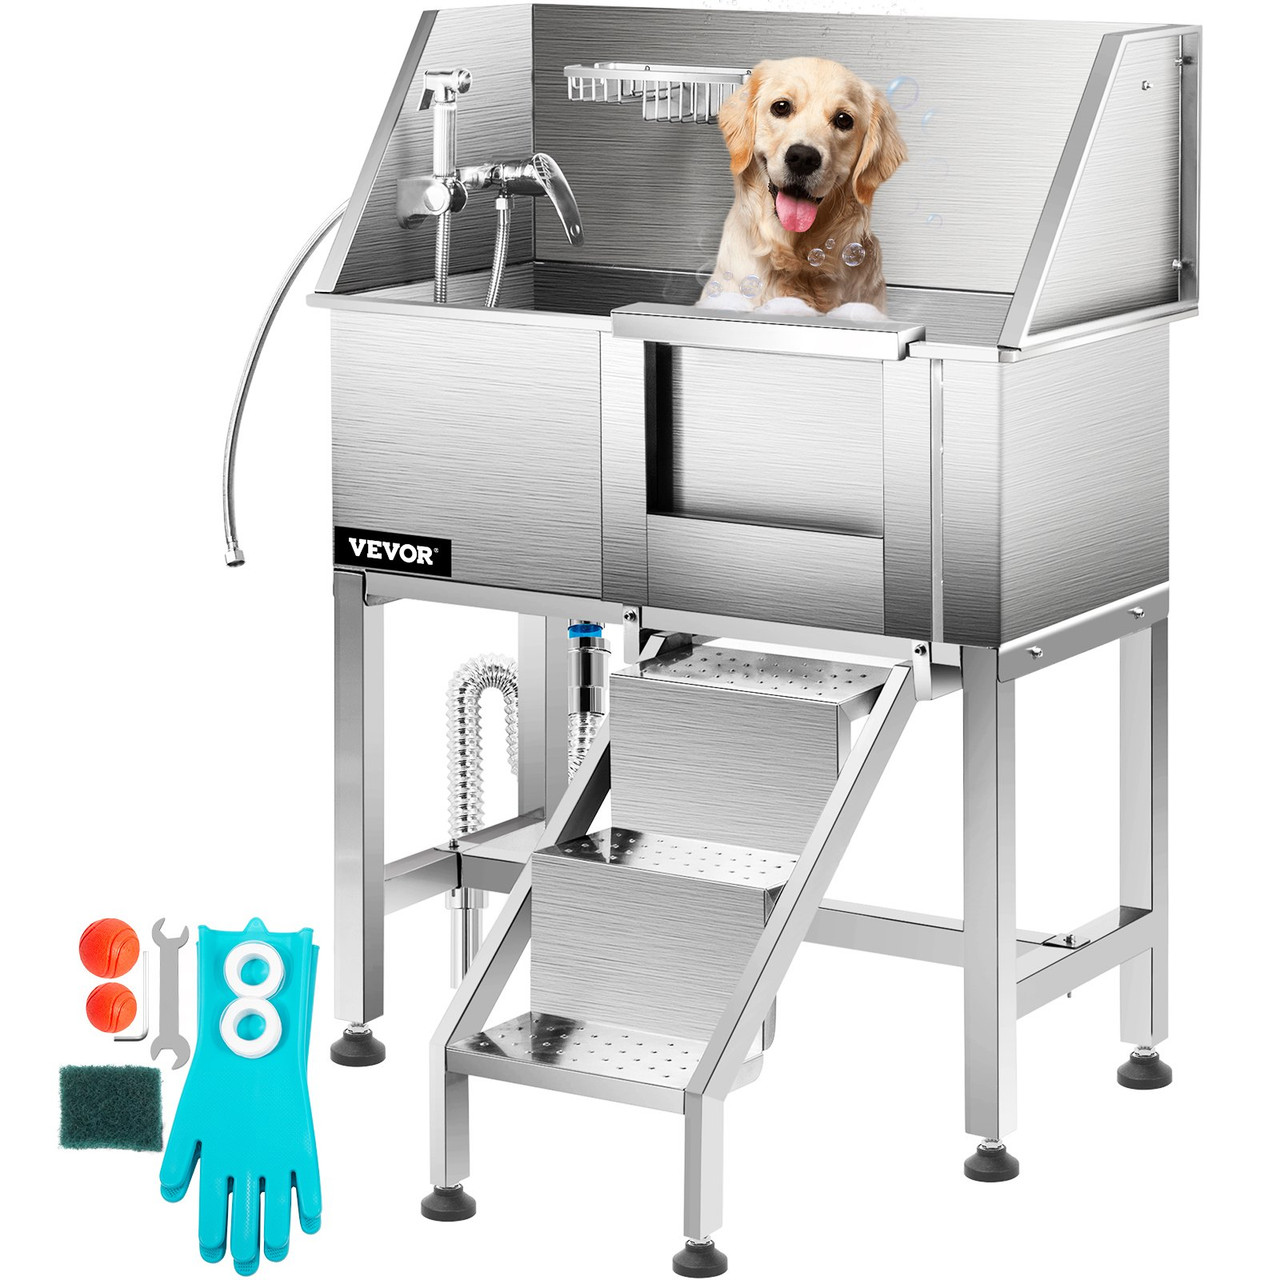 High Quality Stainless Steel Dog Grooming Tubs